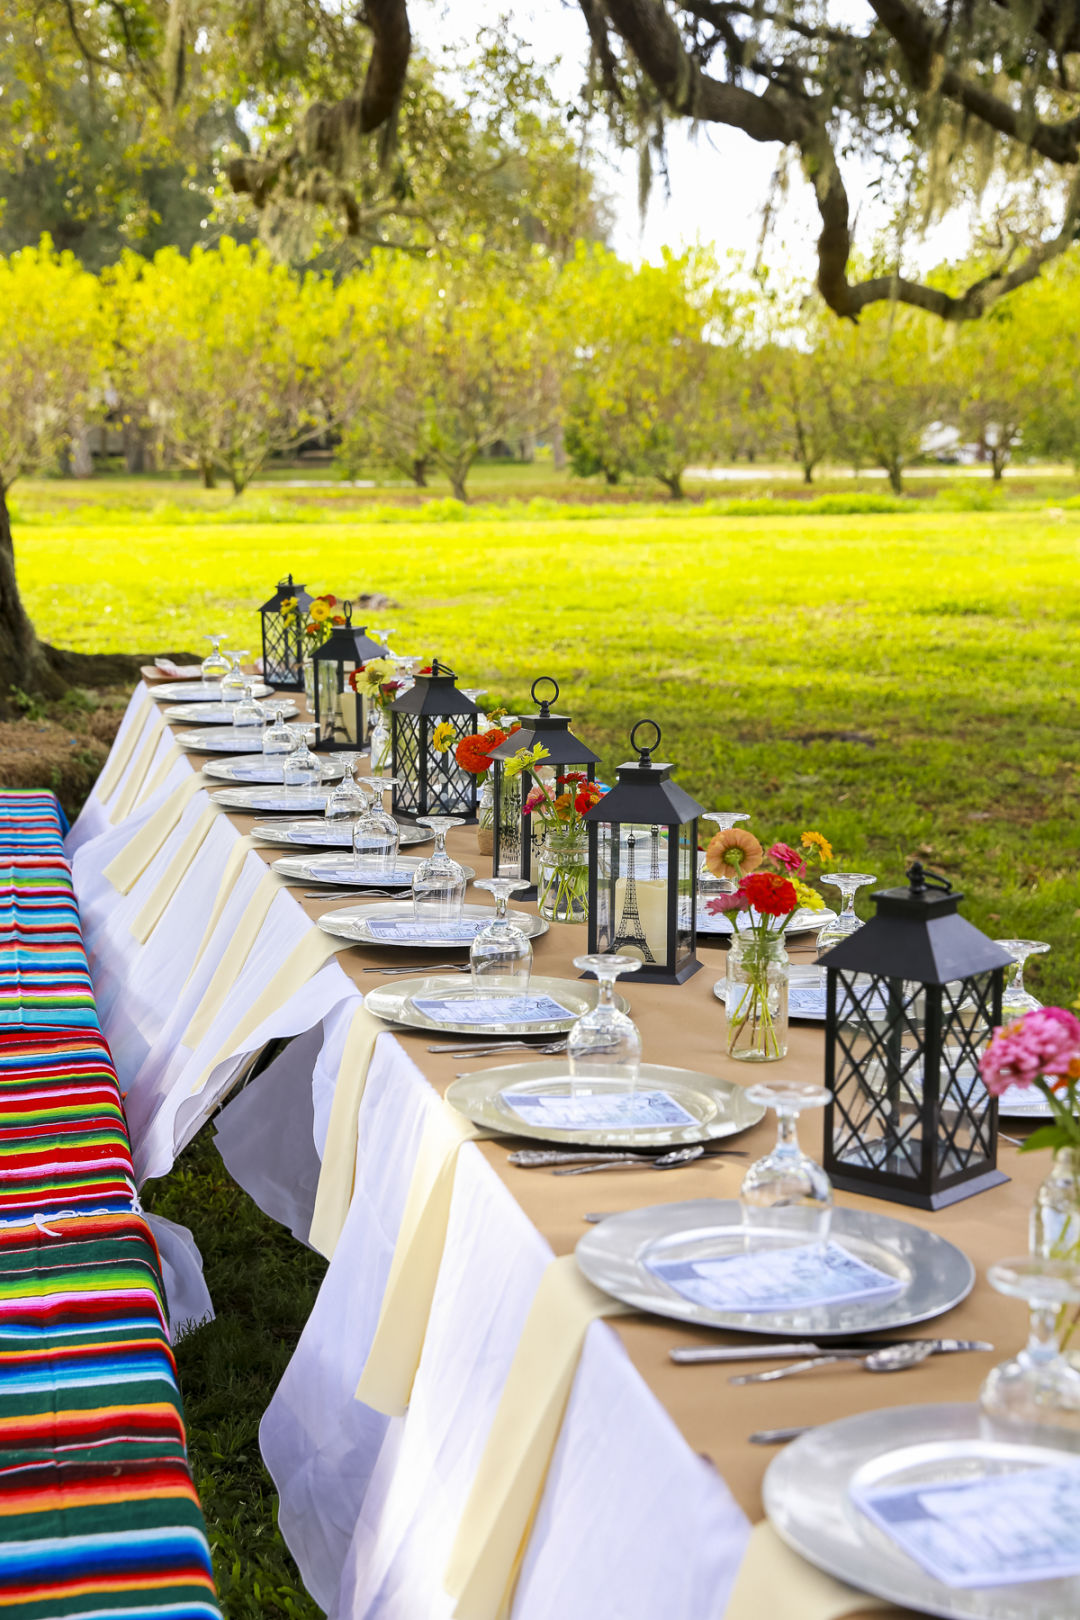 Outdoor Event How to Plan Outdoor Events 101: Throw a Safe and Fun Party - 1